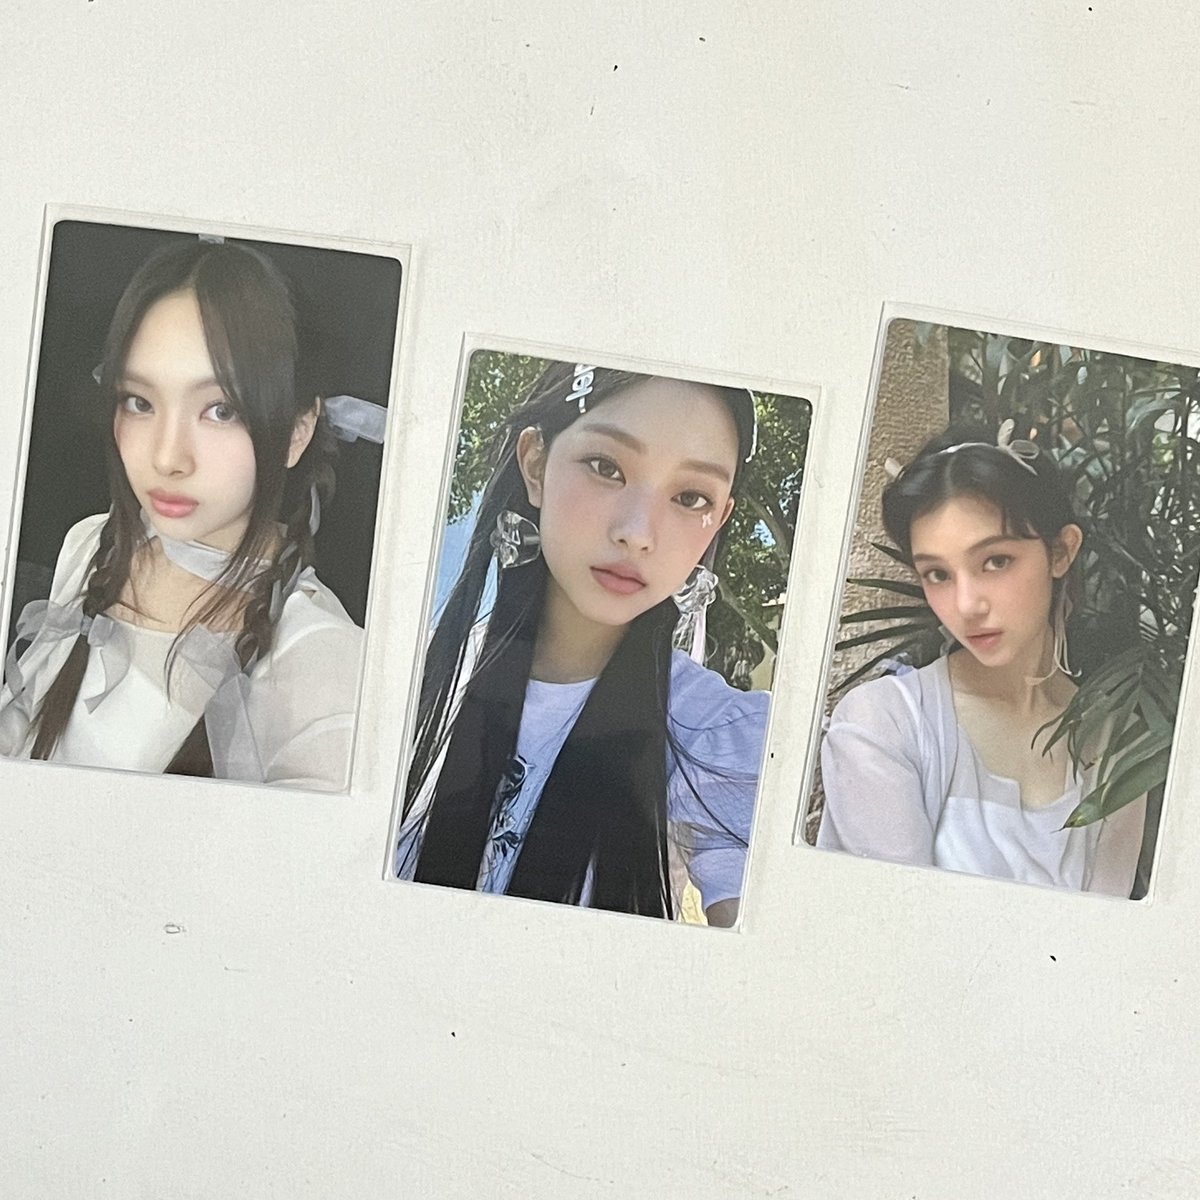 WTS lfb want to sell new jeans photocard pokercard from pop up store (blue ver)

→member avail: hyein, haerin, 
danielle

→price: 21.500/pcs

→ bisa lewat 🍊

t; new jeans nj hyein haerin danielle photocard pop up store jakarta wts wtb jastip